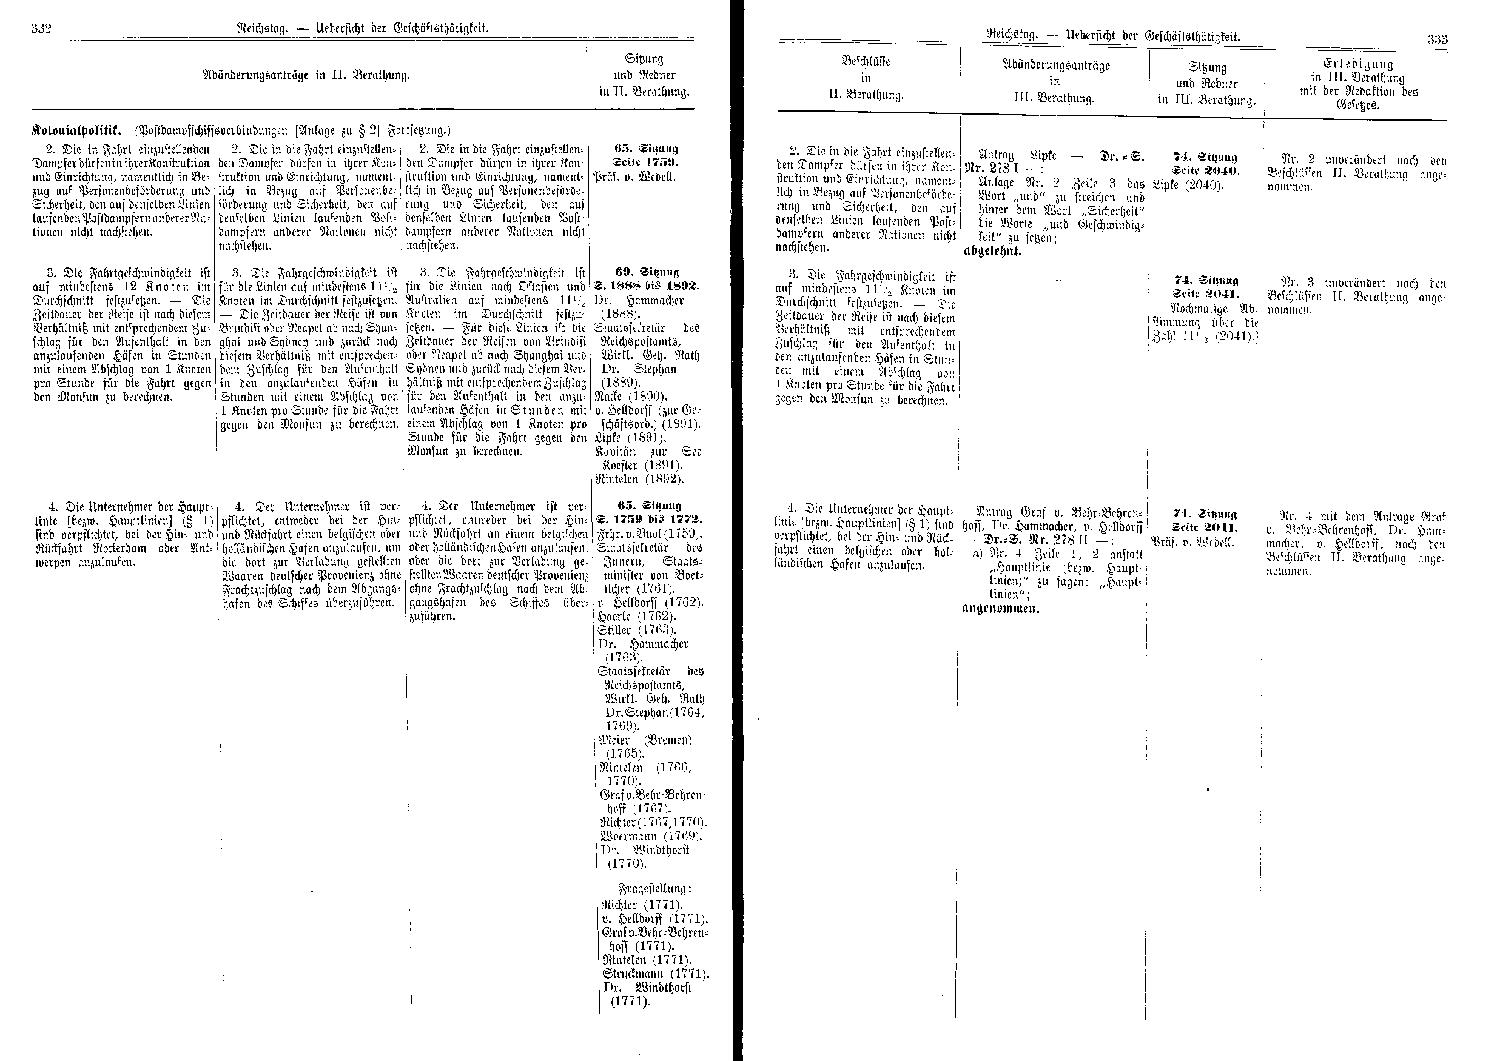 Scan of page 332-333